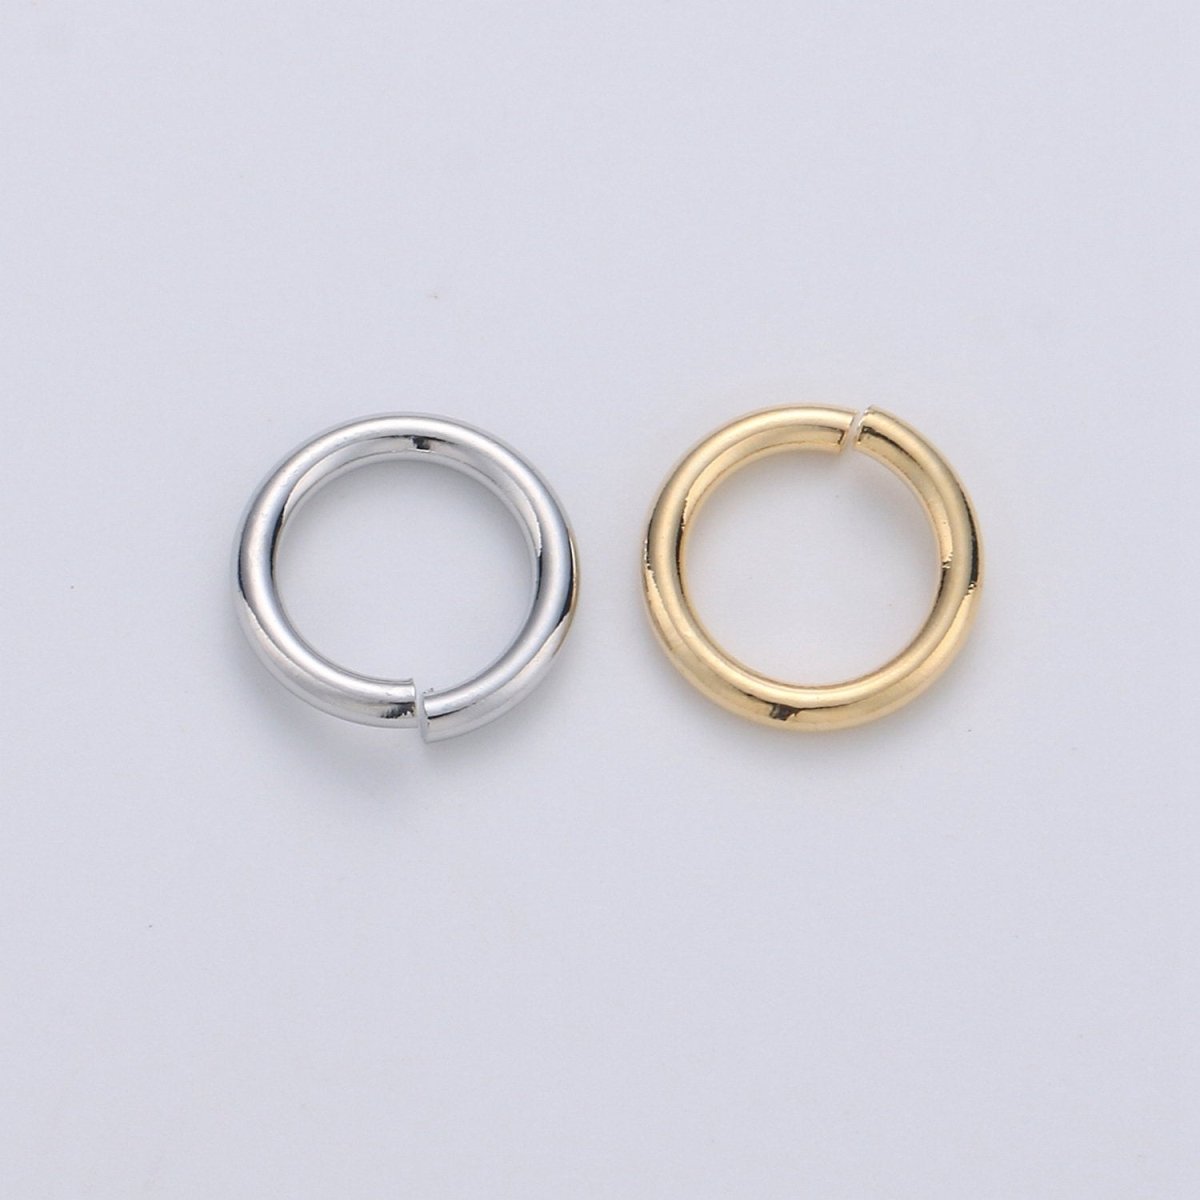 Open Jump Ring Real Gold Plated Jump Ring 4mm, 7mm with 20 gauge / 0.8mm thickness for Jewelry Supply Component 10gram SP-1580 SP-1581 SP-1592 SP-1593 - DLUXCA